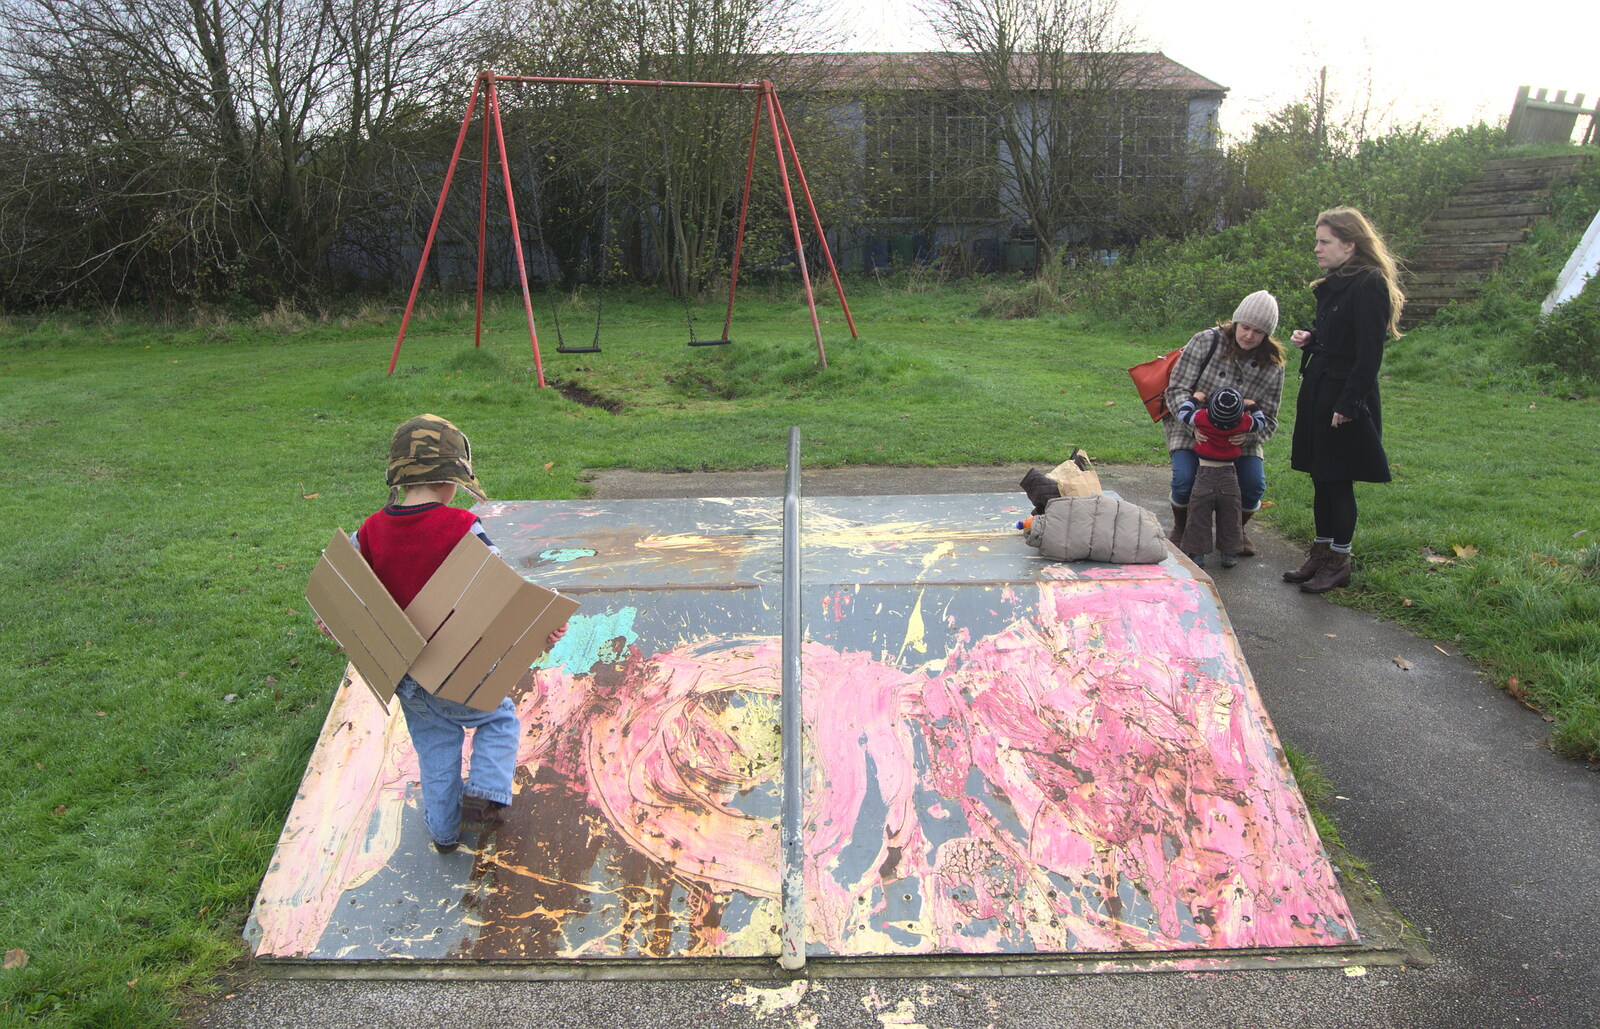 More Building and Palgrave Playground, Suffolk - 24th November 2013: A skate ramp, and Fred's wings